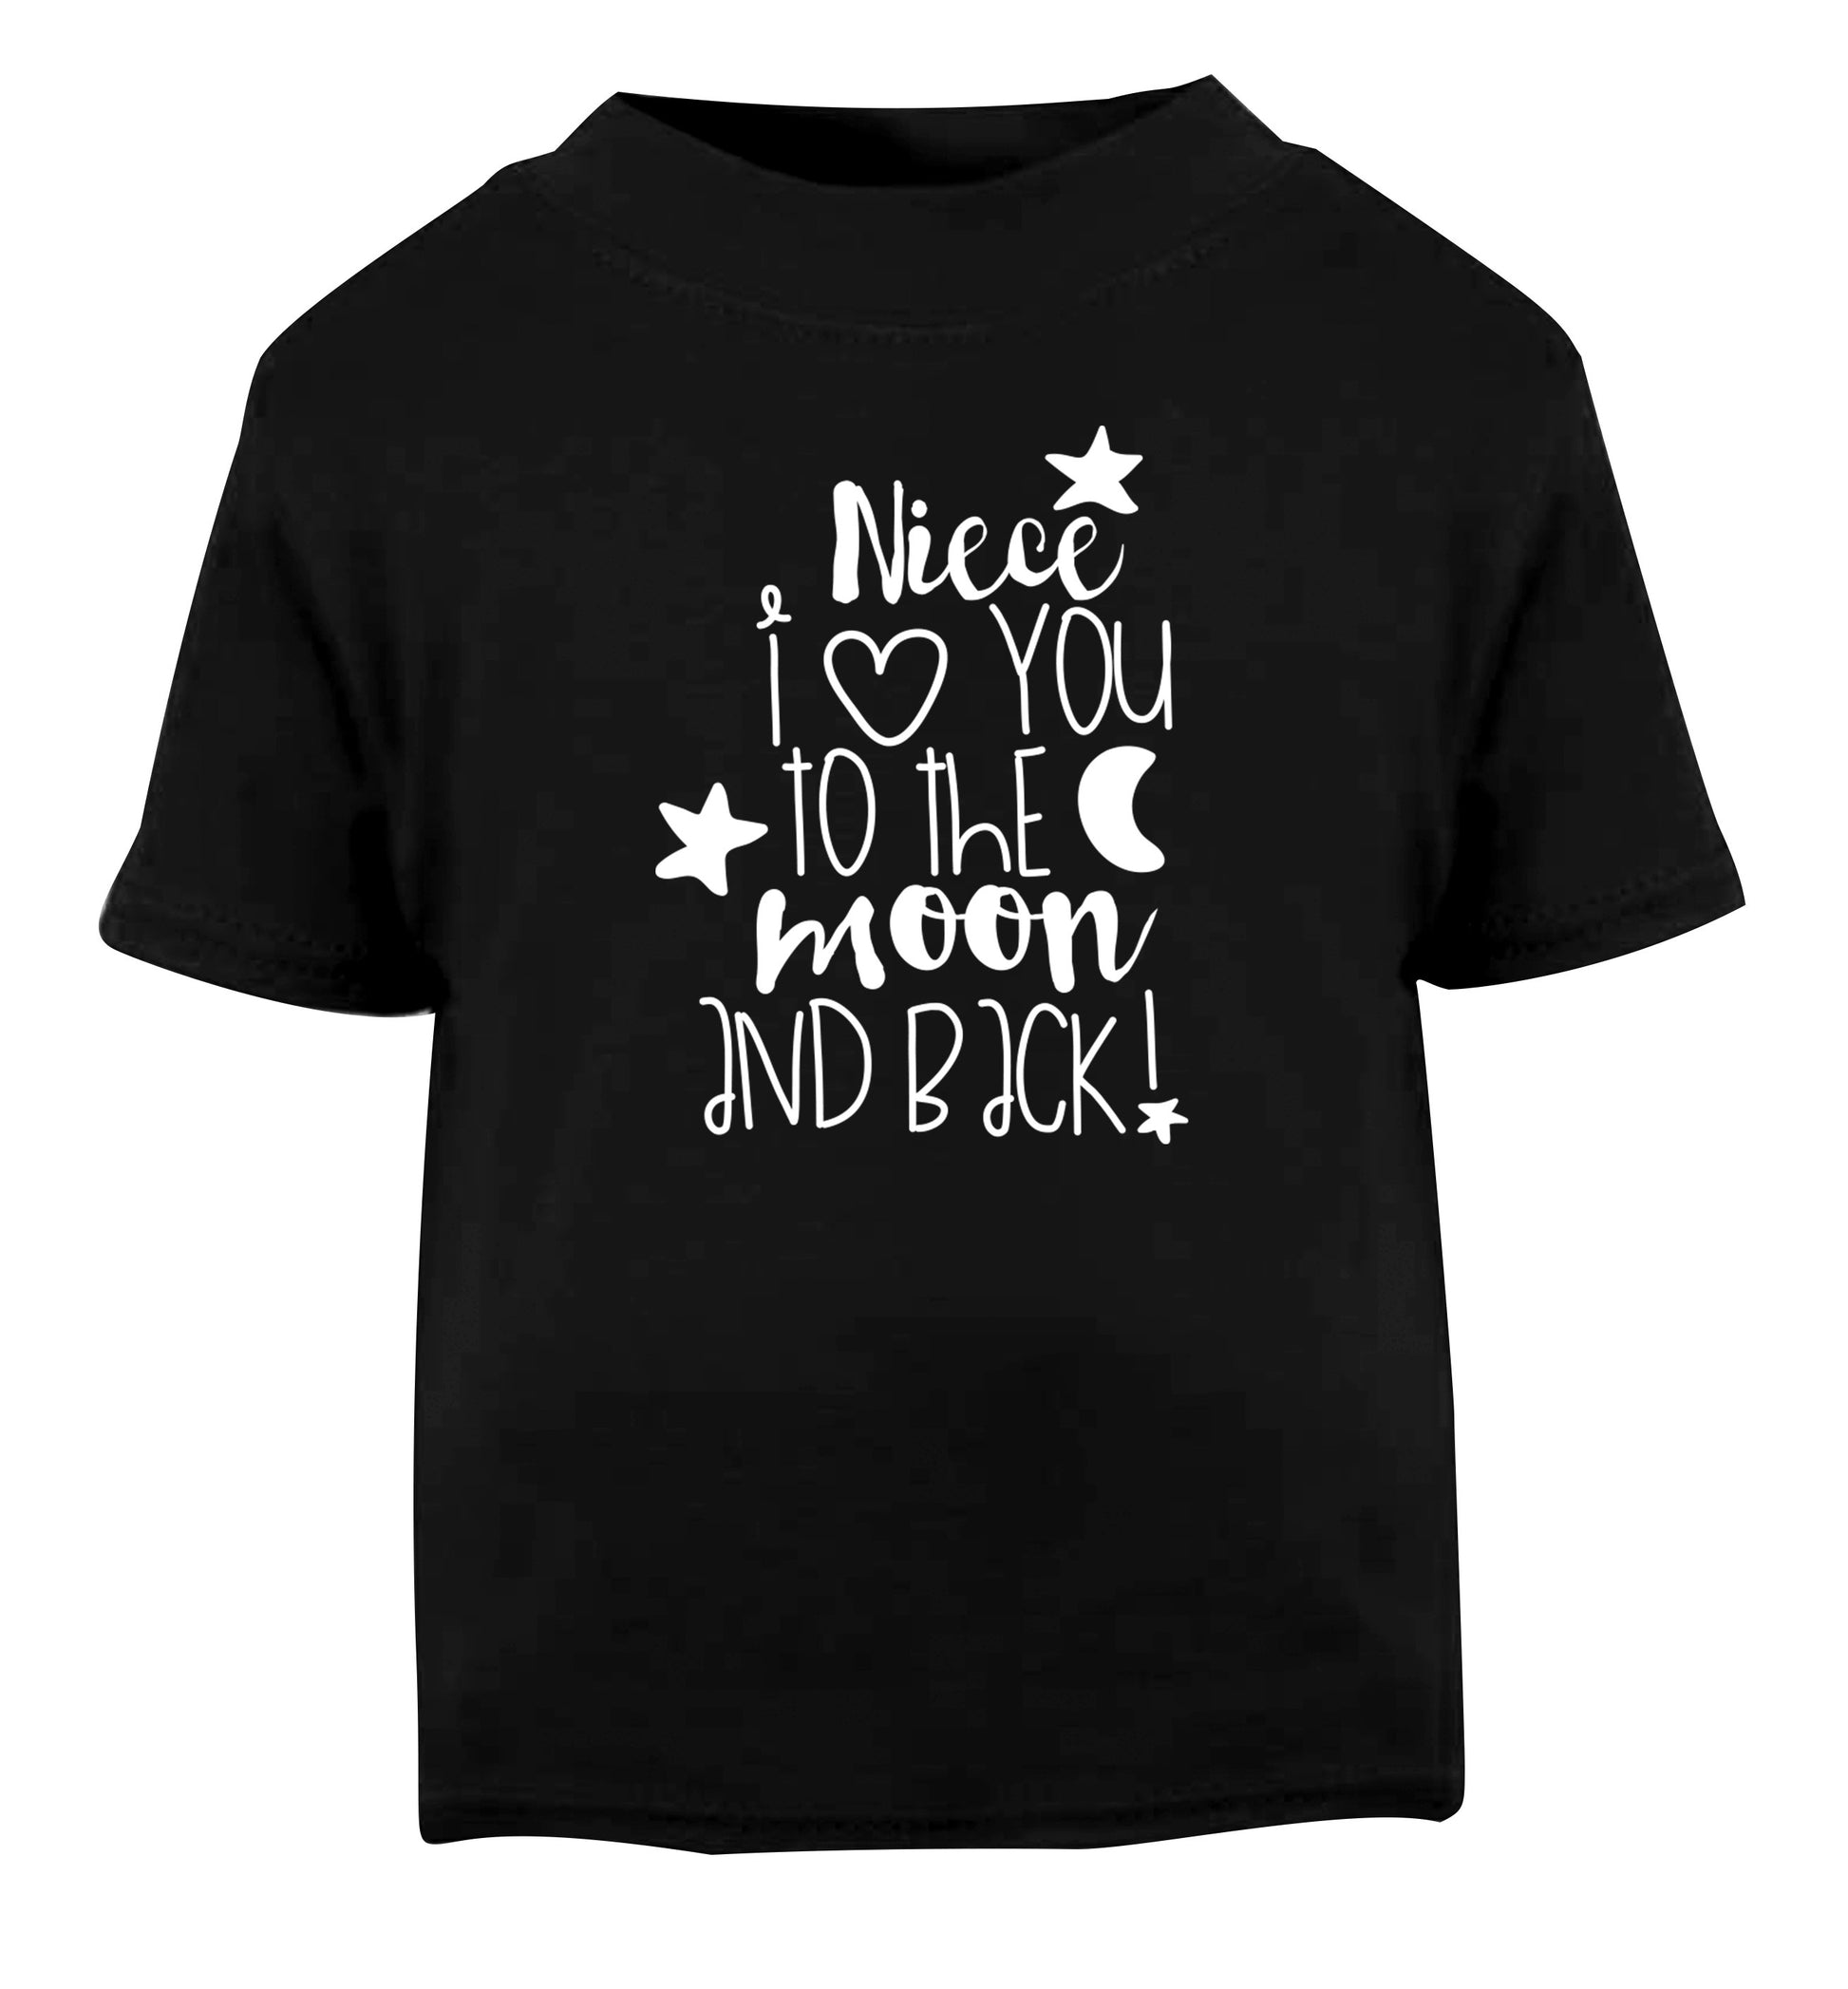 Niece I love you to the moon and back Black Baby Toddler Tshirt 2 years